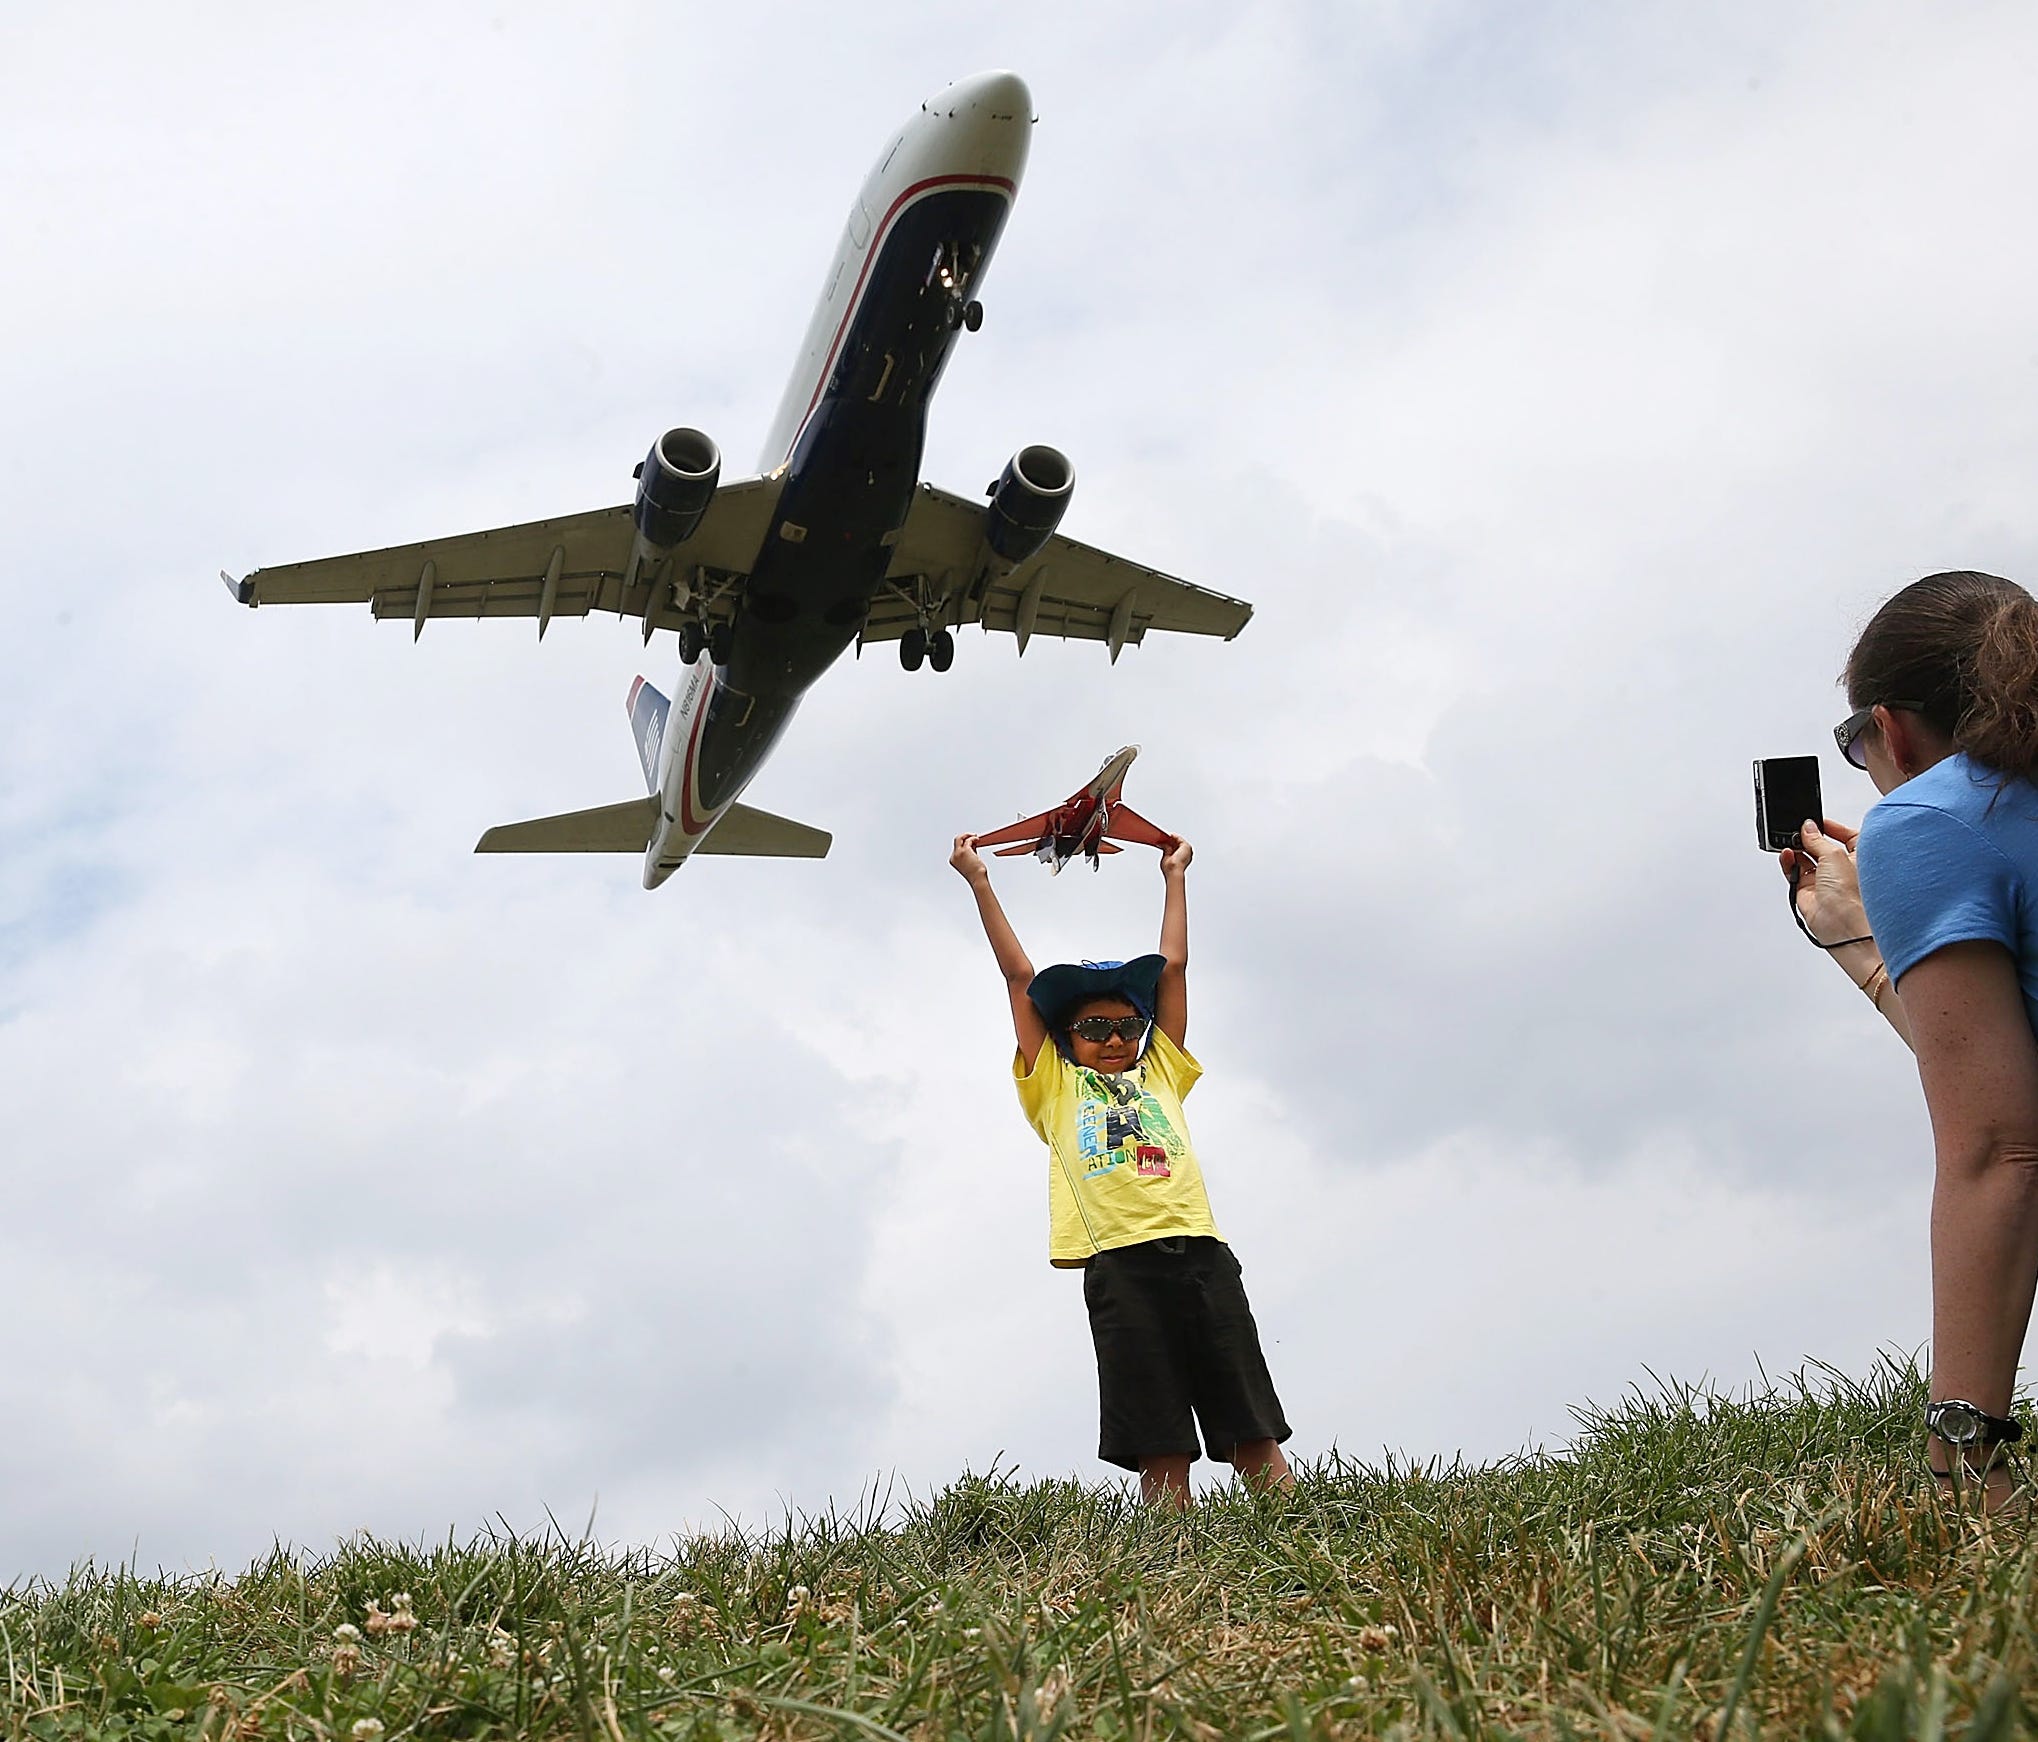 A young boy poses for a picture at Gravelly Point as an airplane flies into Reagan National Airport in Arlington, Virginia.